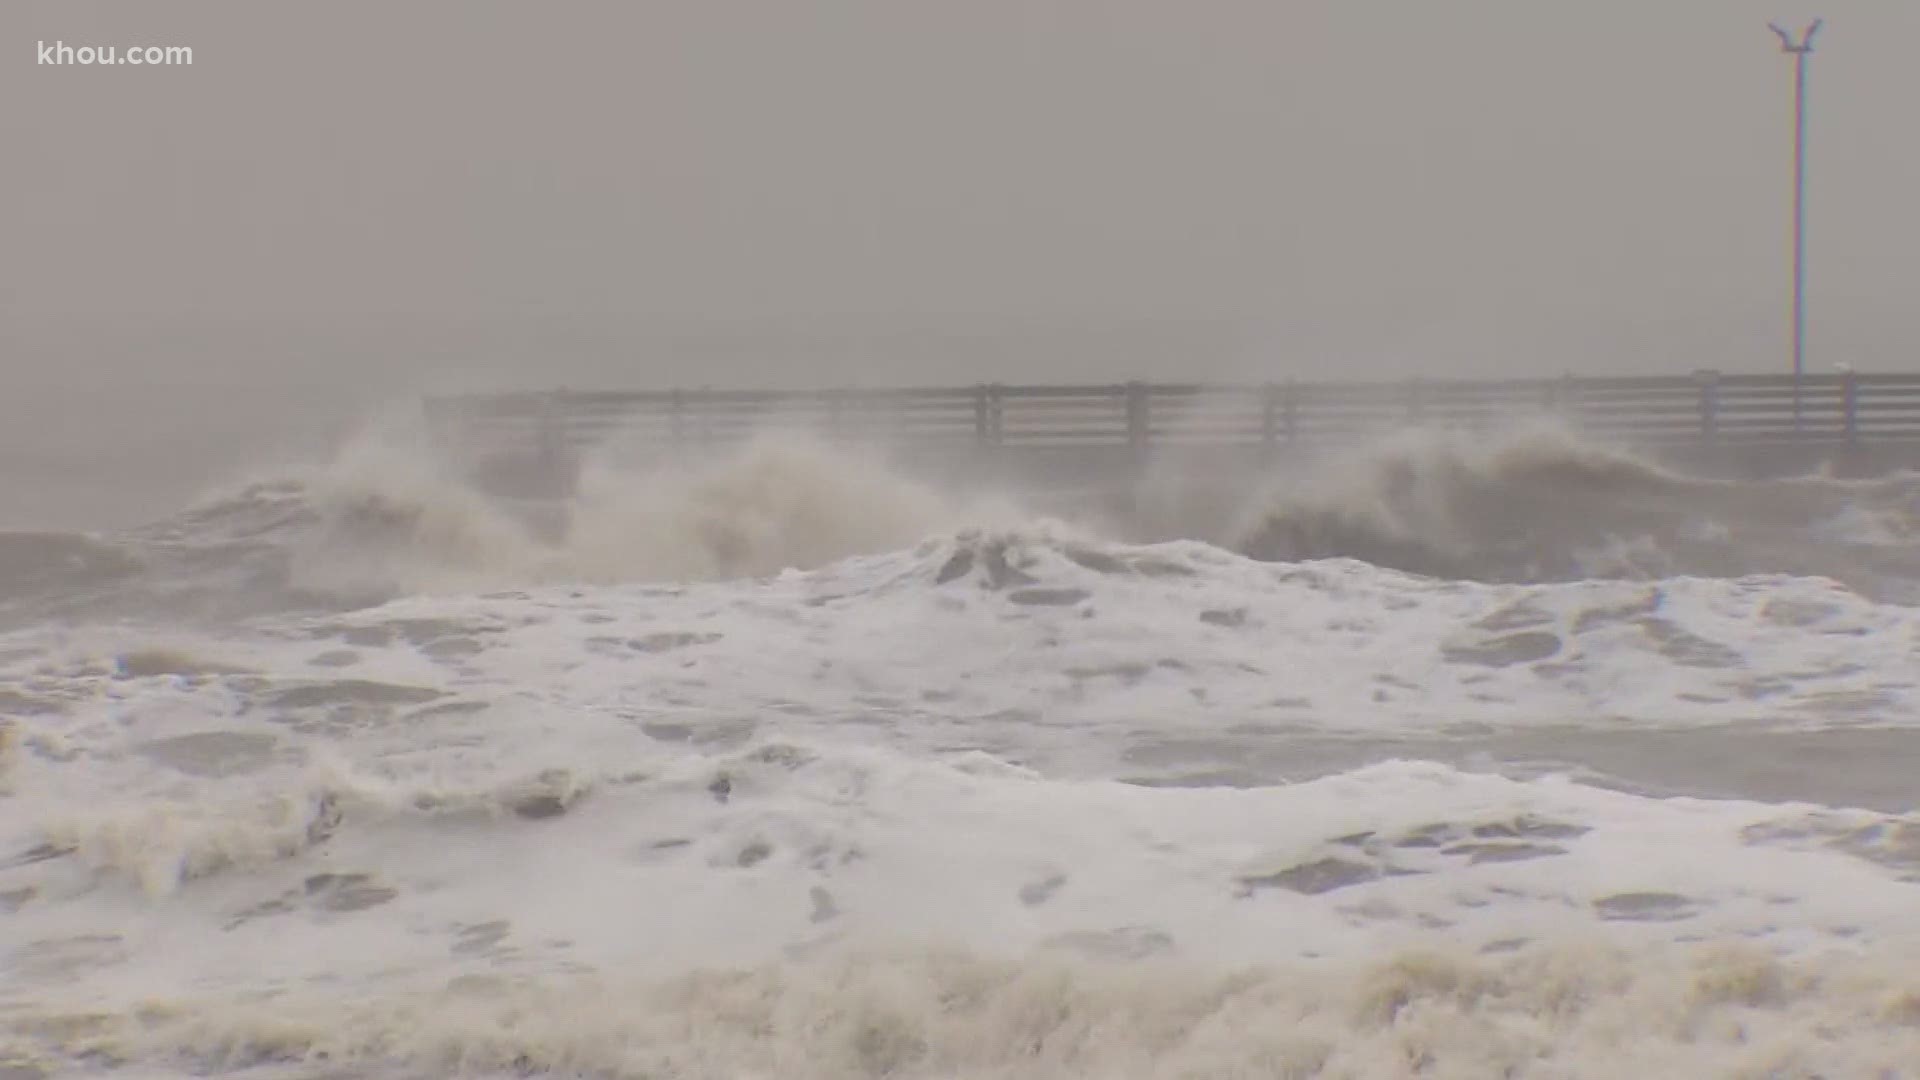 Tropical Storm Beta is already bringing flooding to some parts of Galveston Island ahead of landfall.